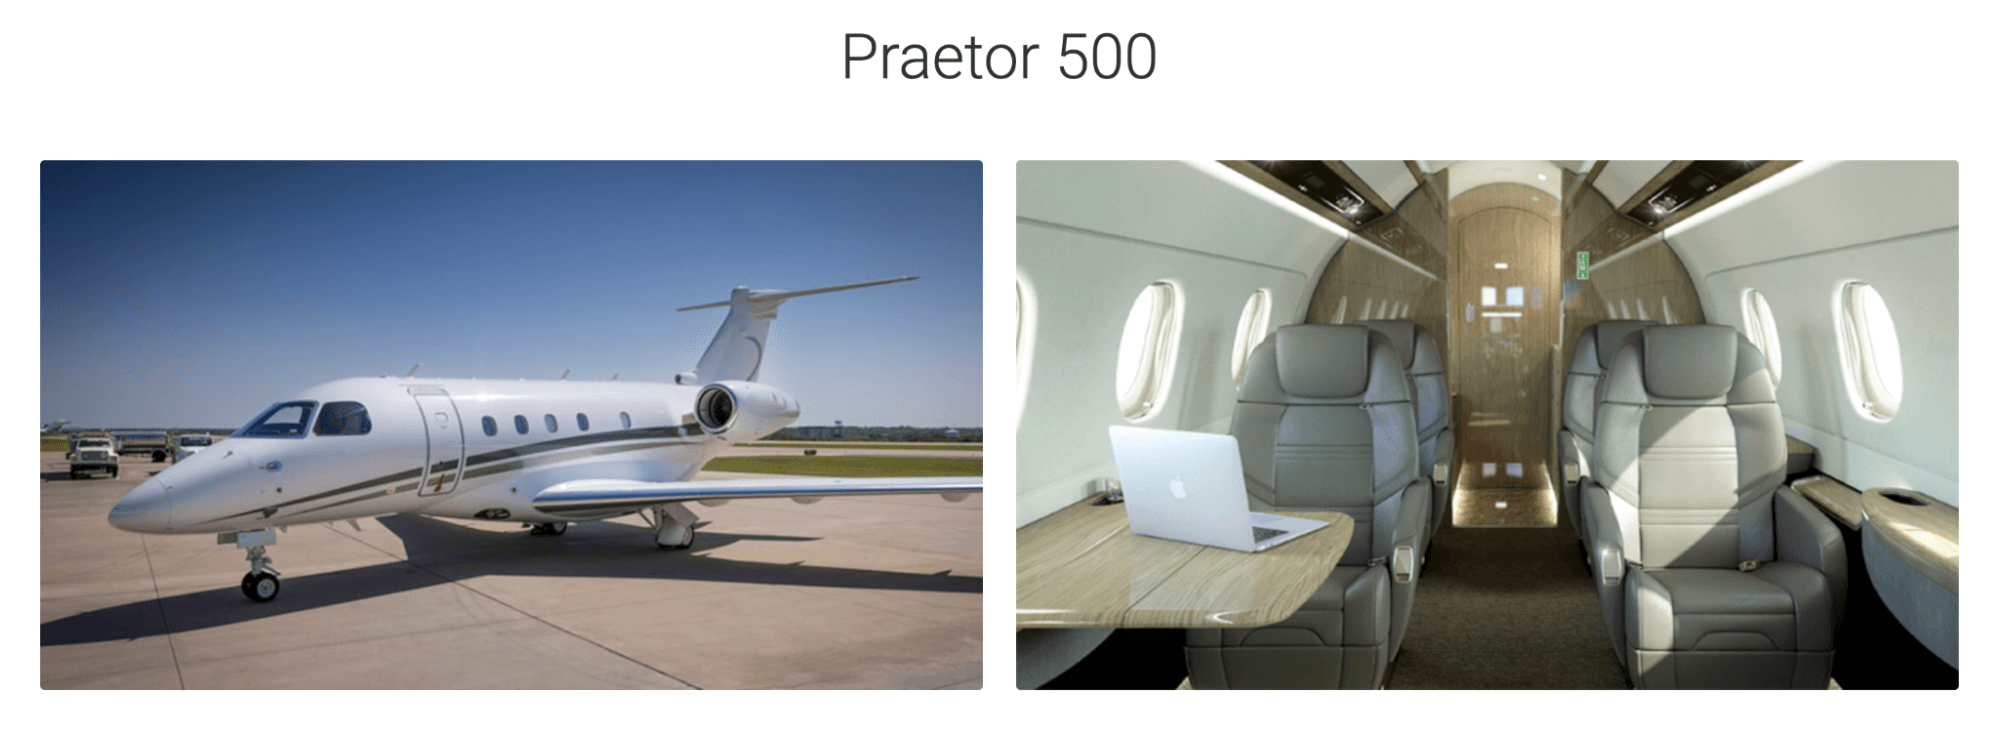 The picture shows the interior and exterior of Praetor 500 jets available from JetOptions.